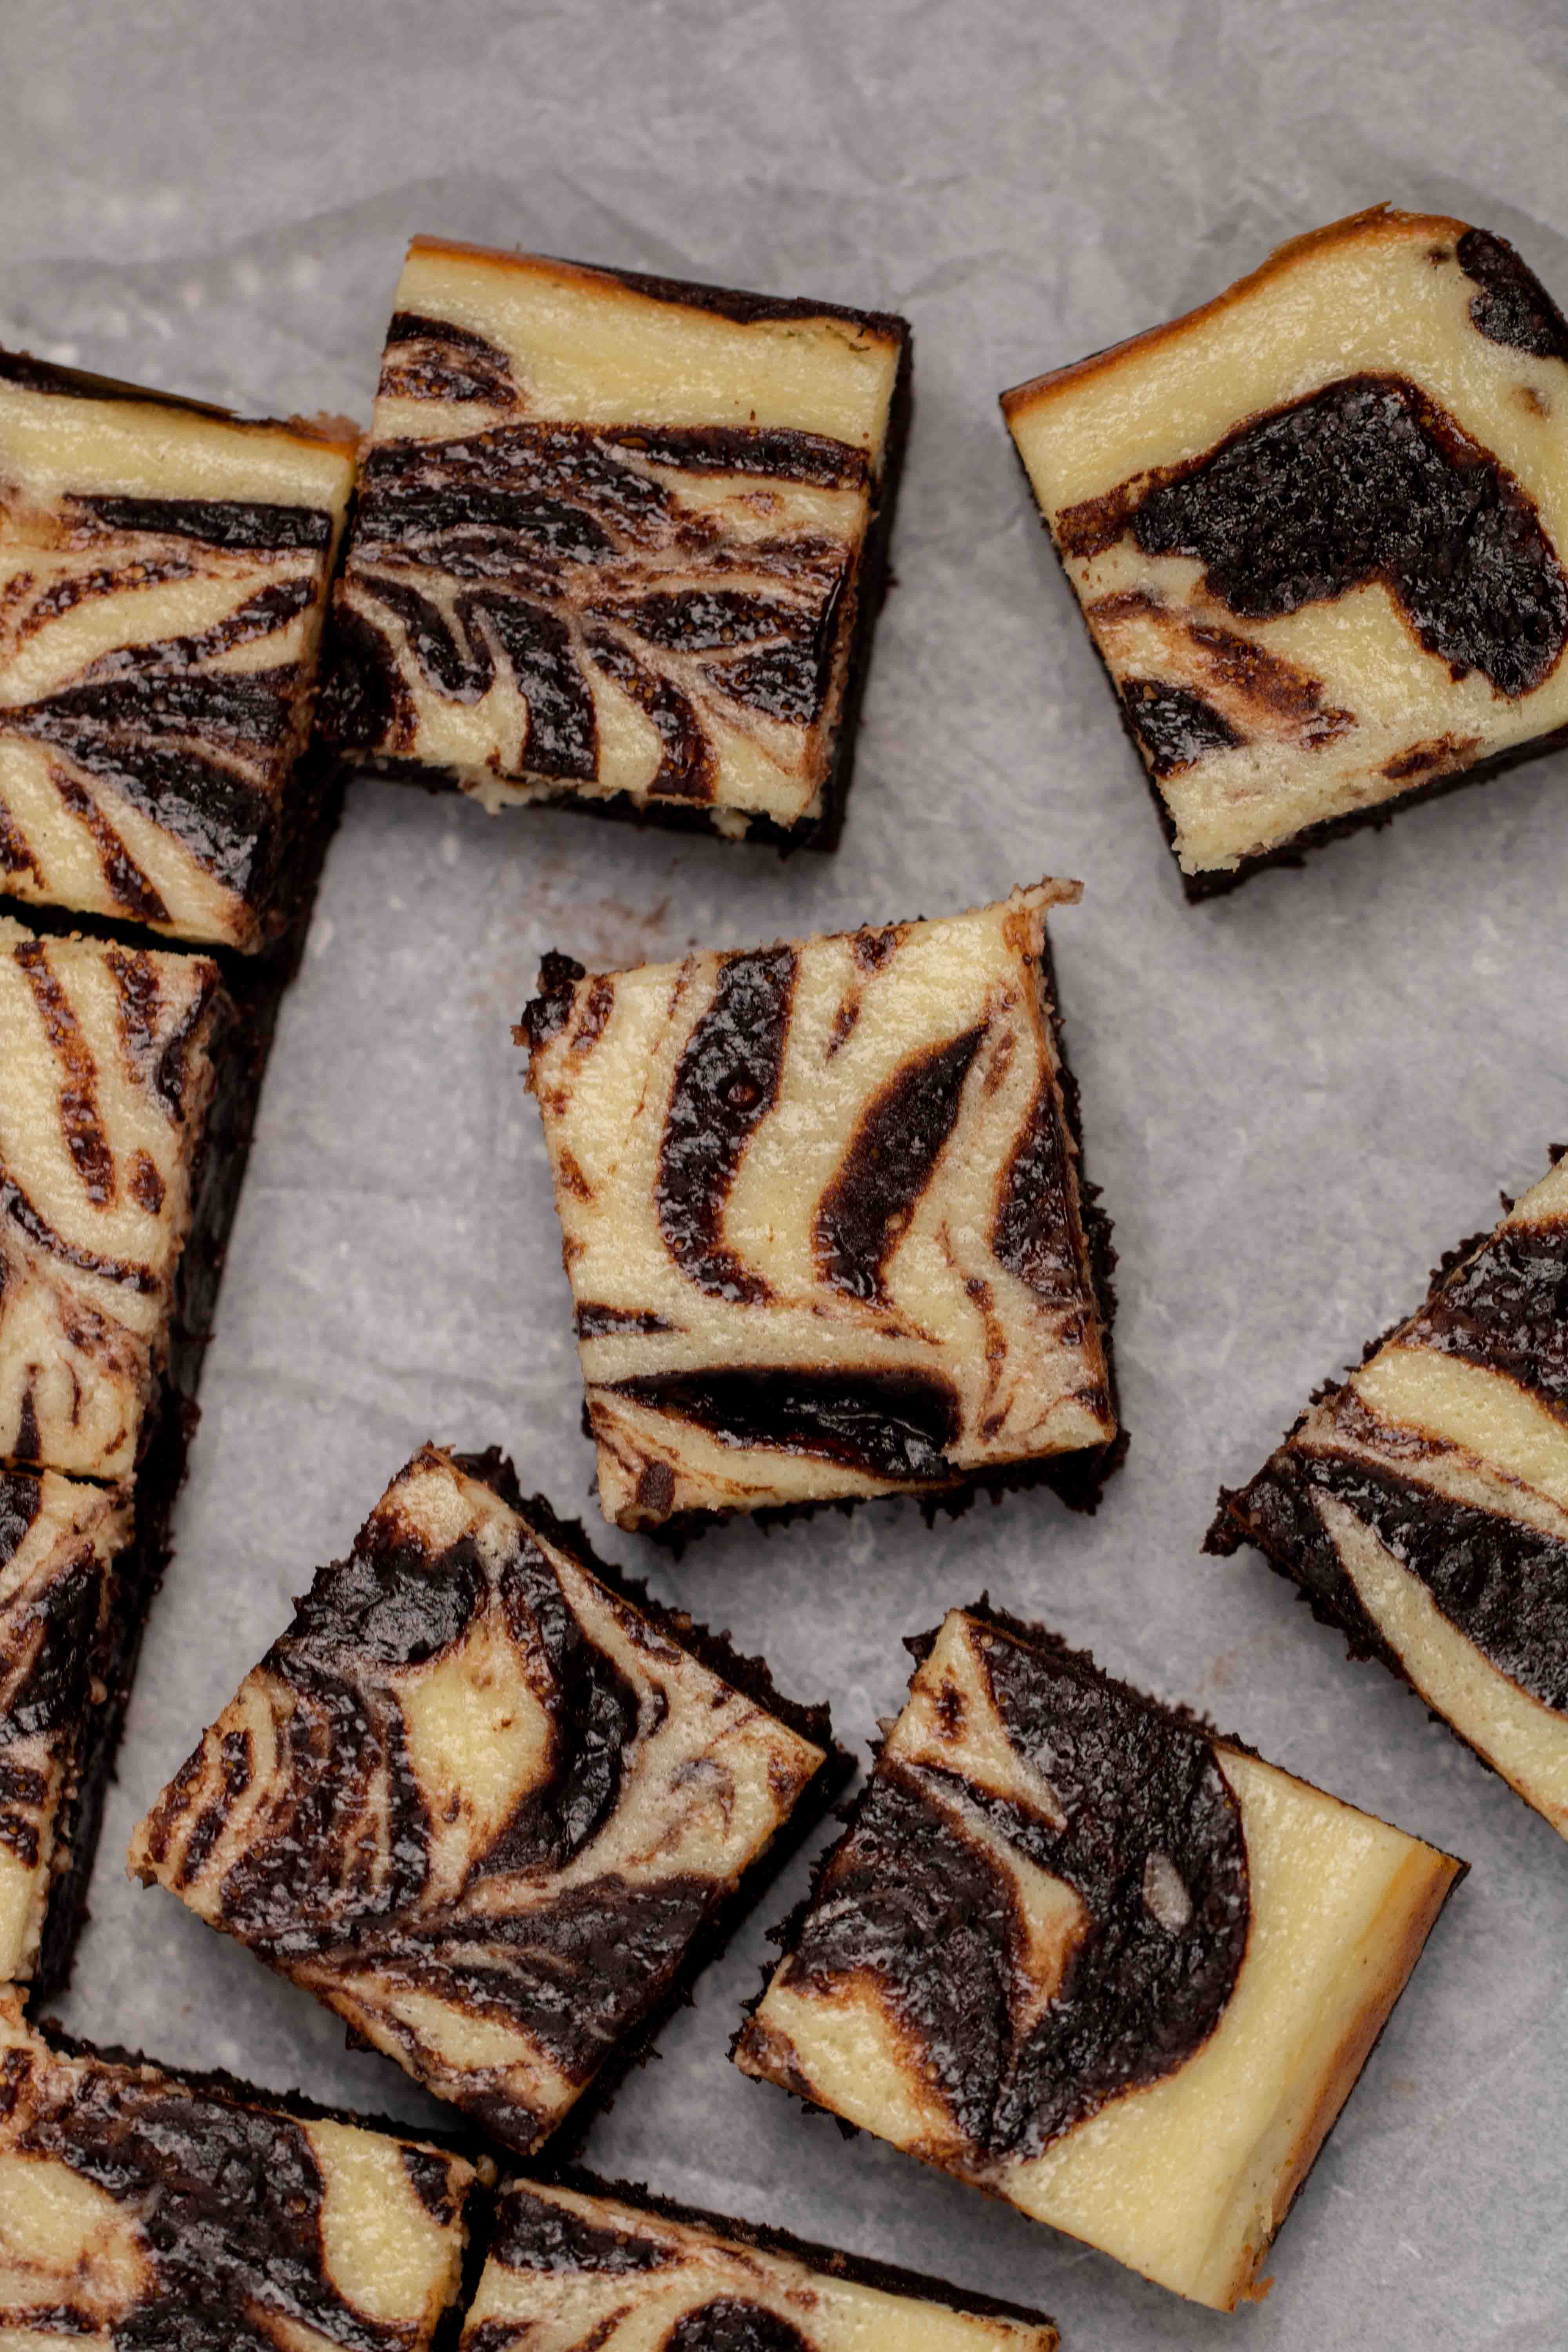 How to keep cheesecake brownies soft and chewy